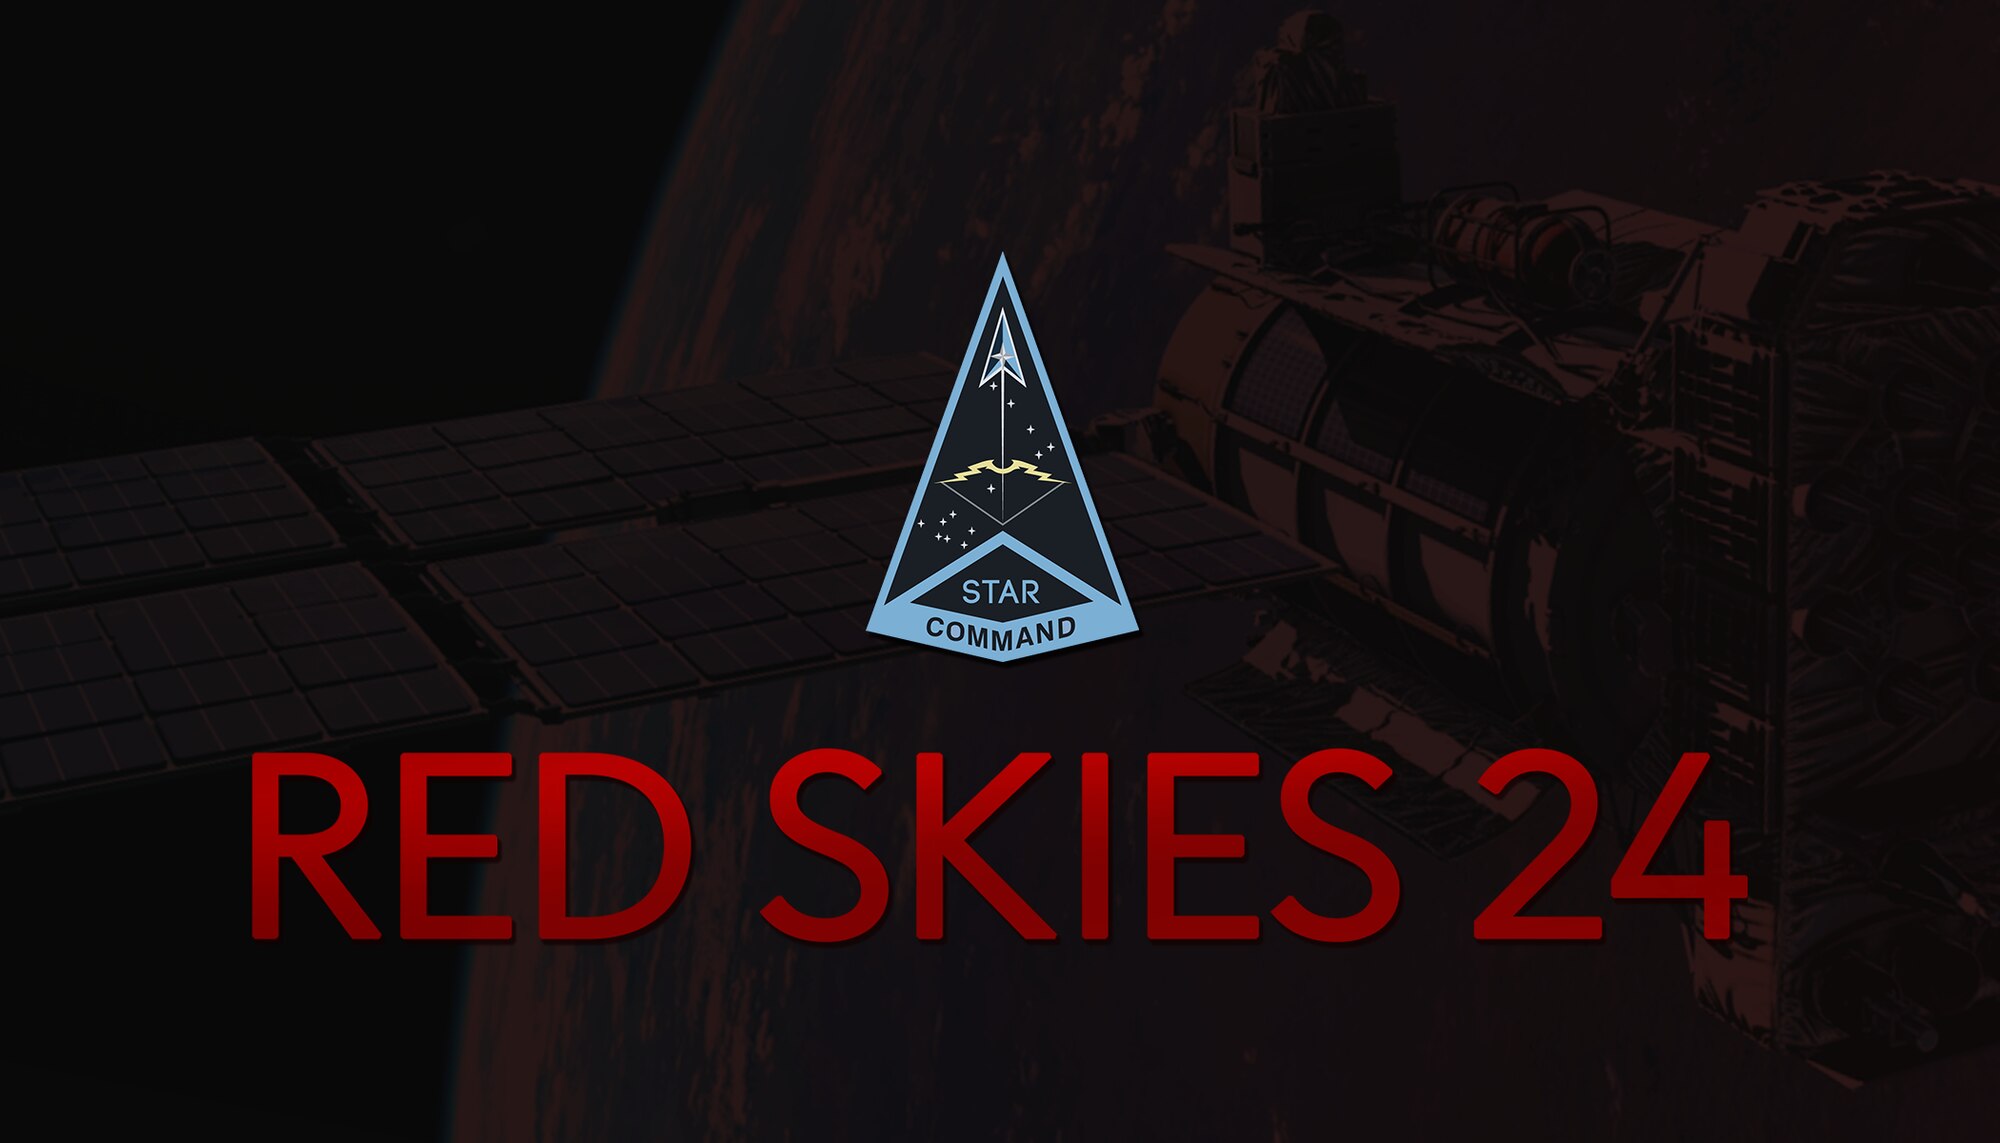 RED SKIES 24 graphic